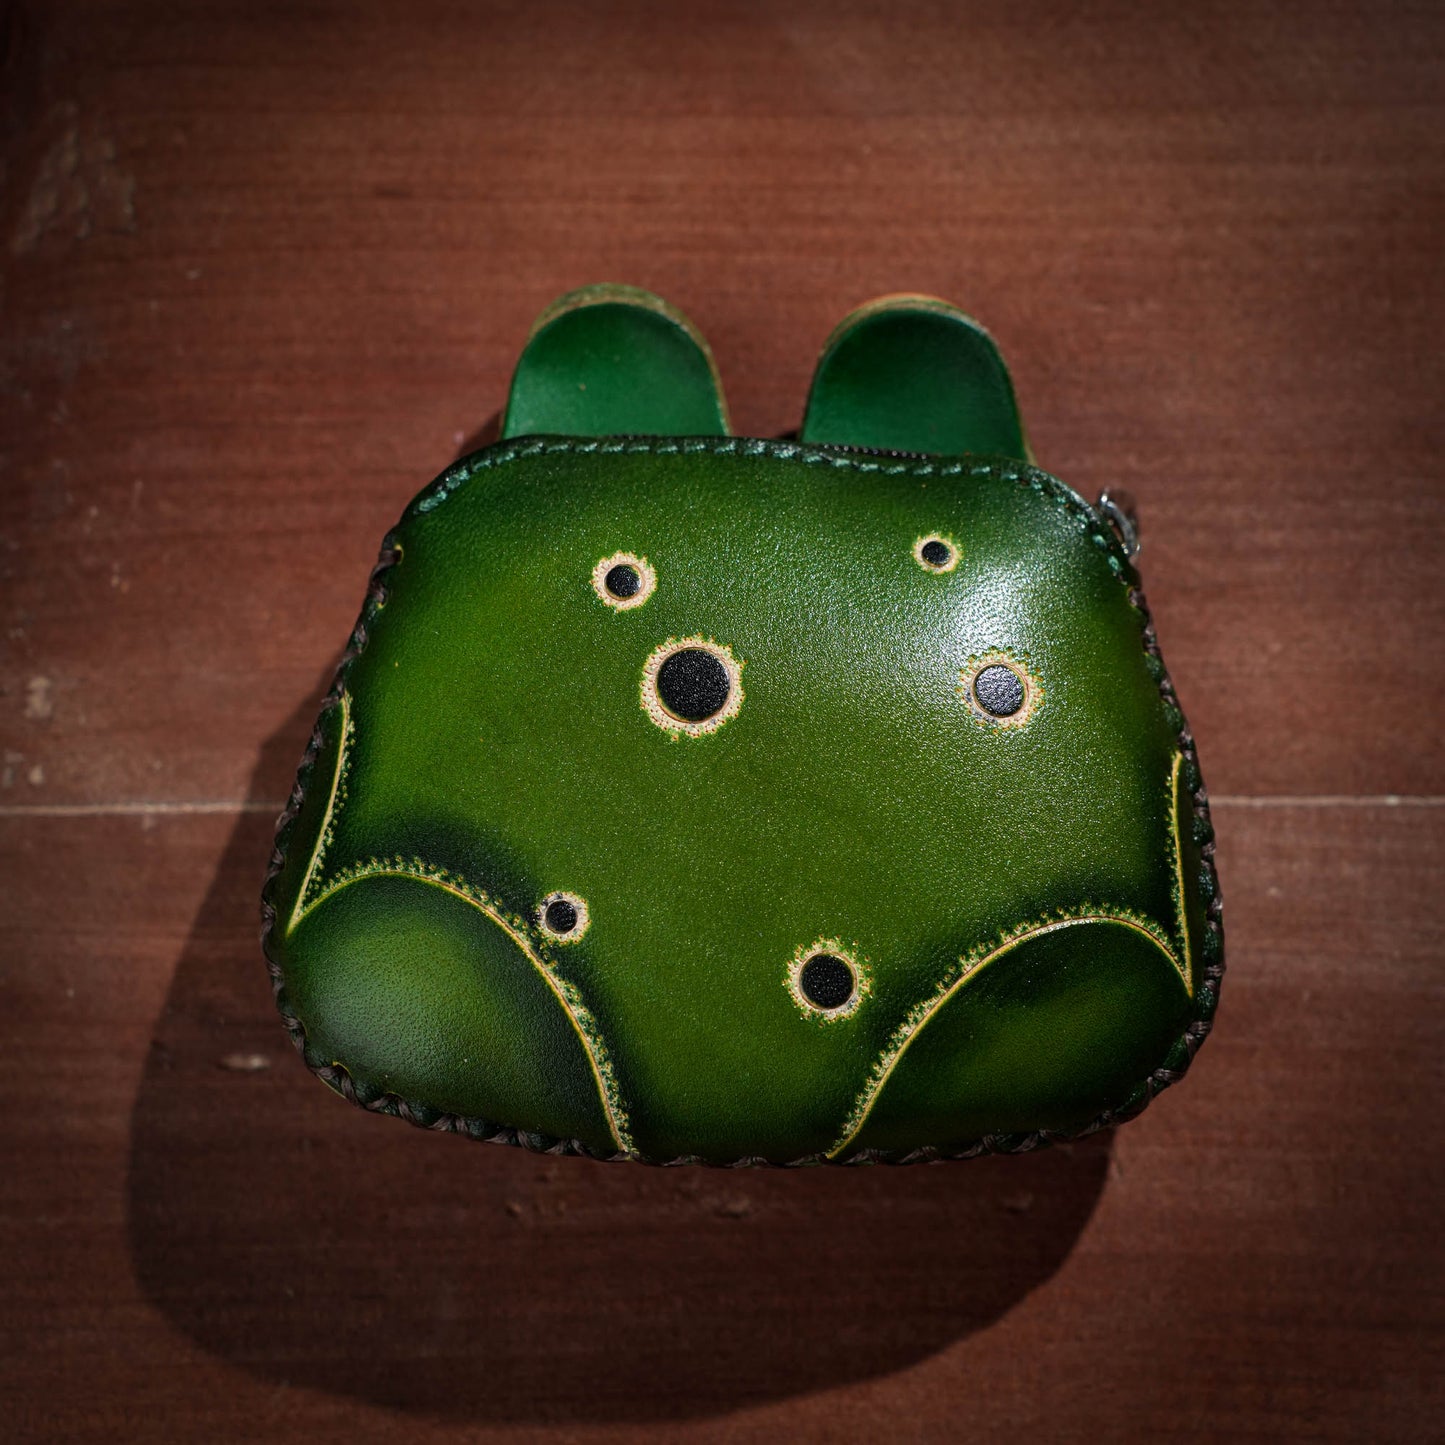 Big Eyed Frog Leather Coin Purse